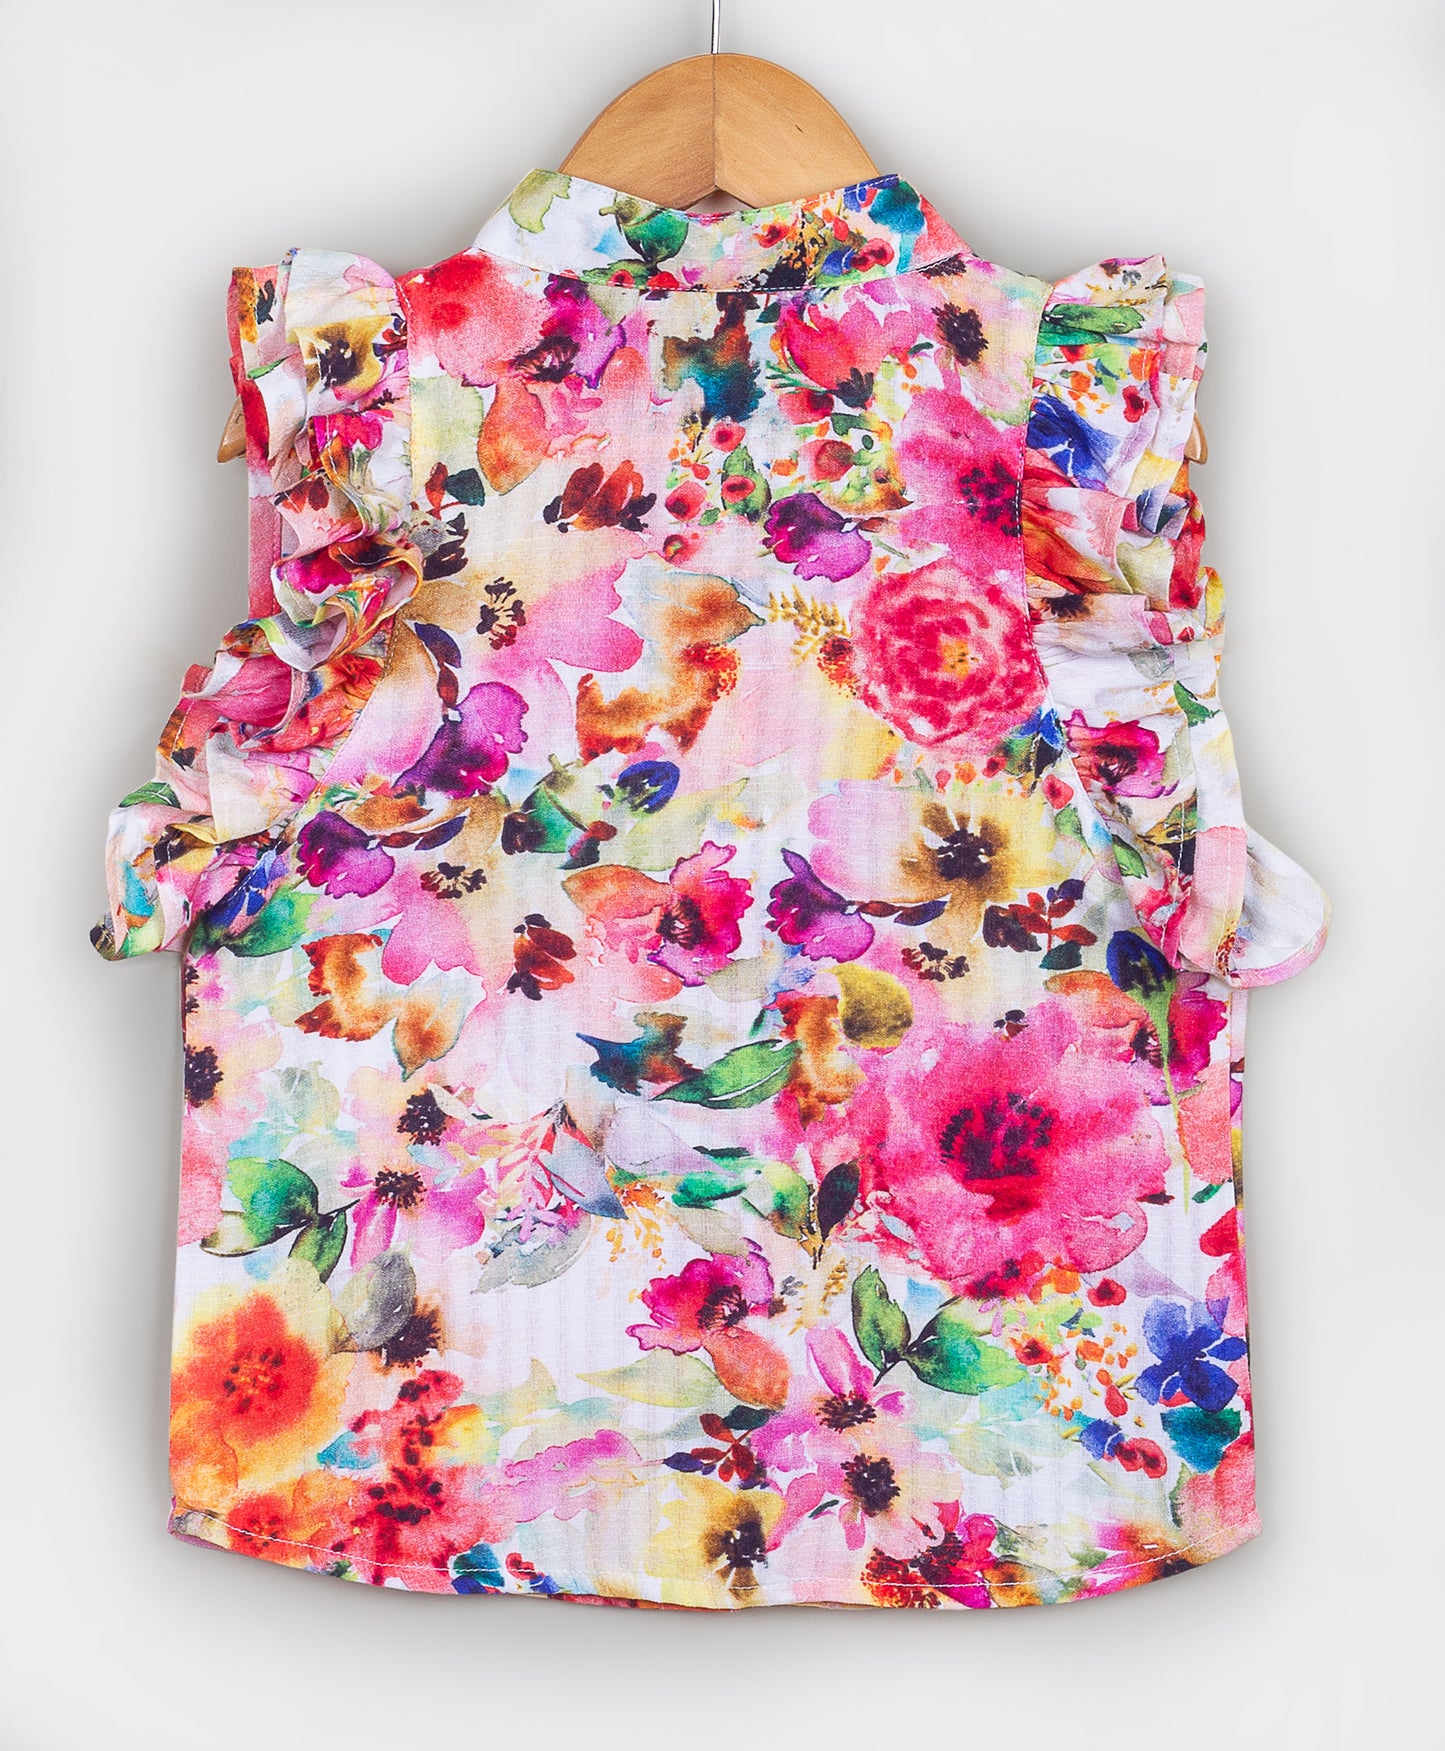 Water color effect floral print top